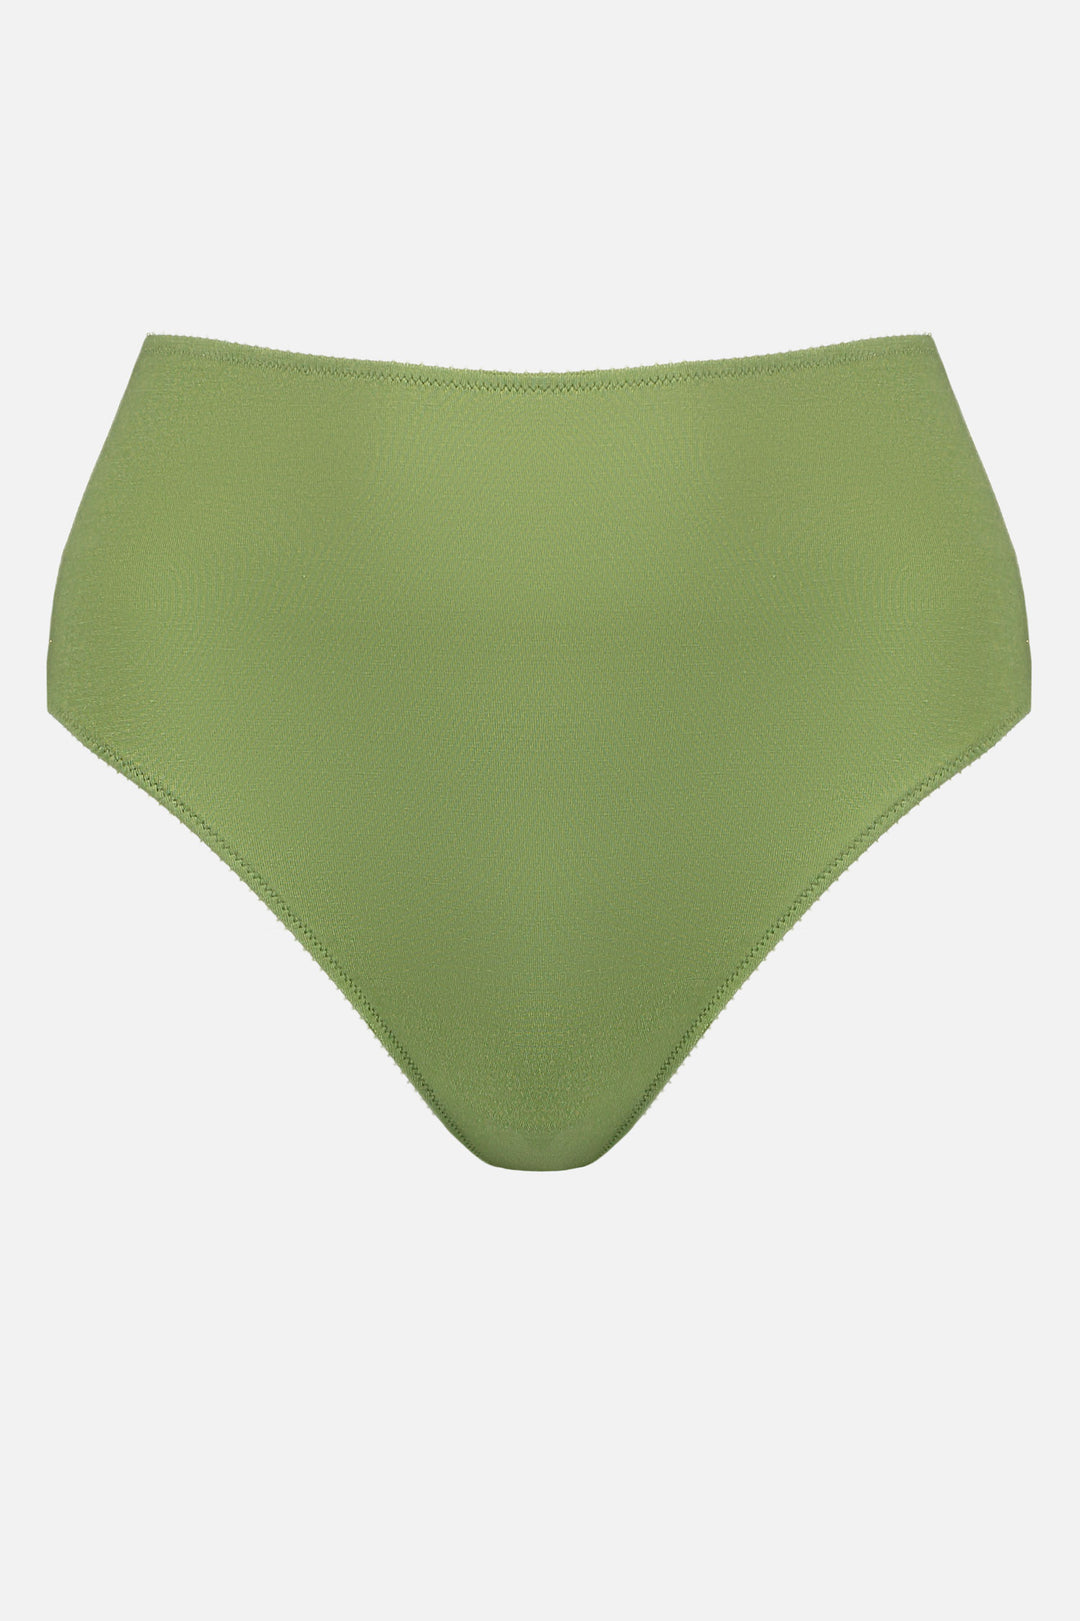 Videris Lingerie high waist knicker in olive TENCEL™ cut to follow the natural curve of your hips